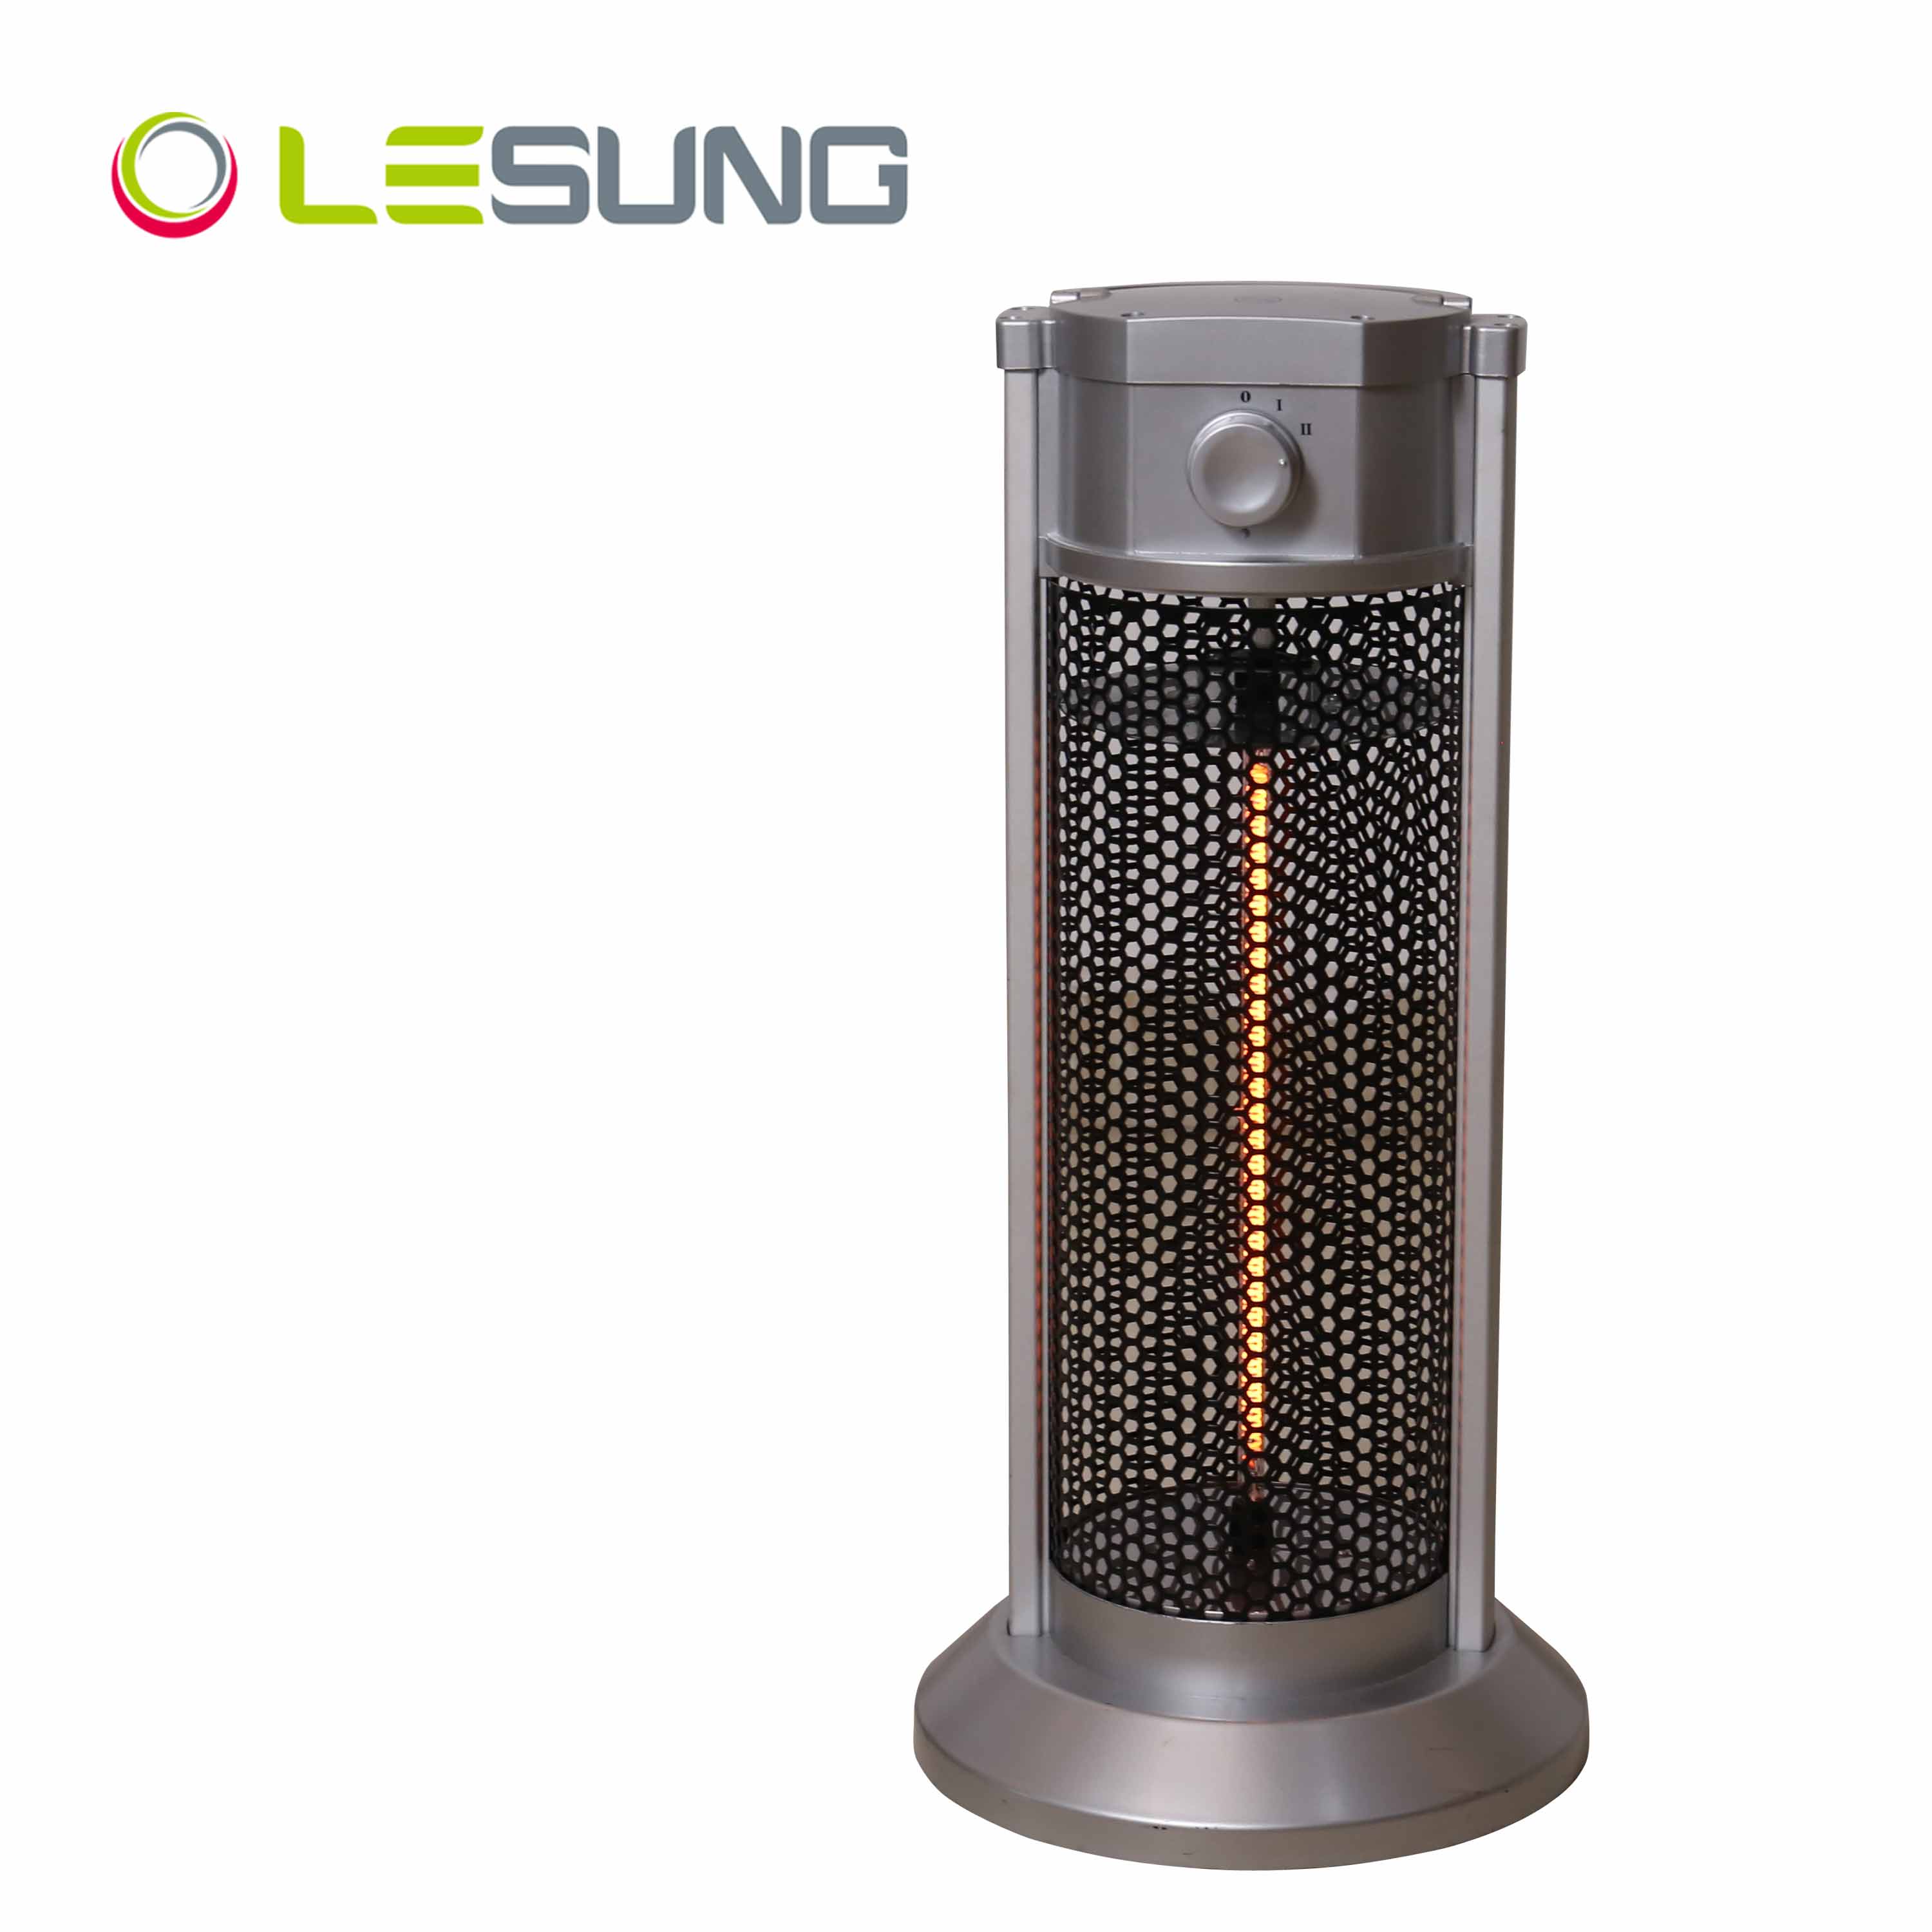 Cylindrical Freestanding Carbon Fiber Heater with Handle